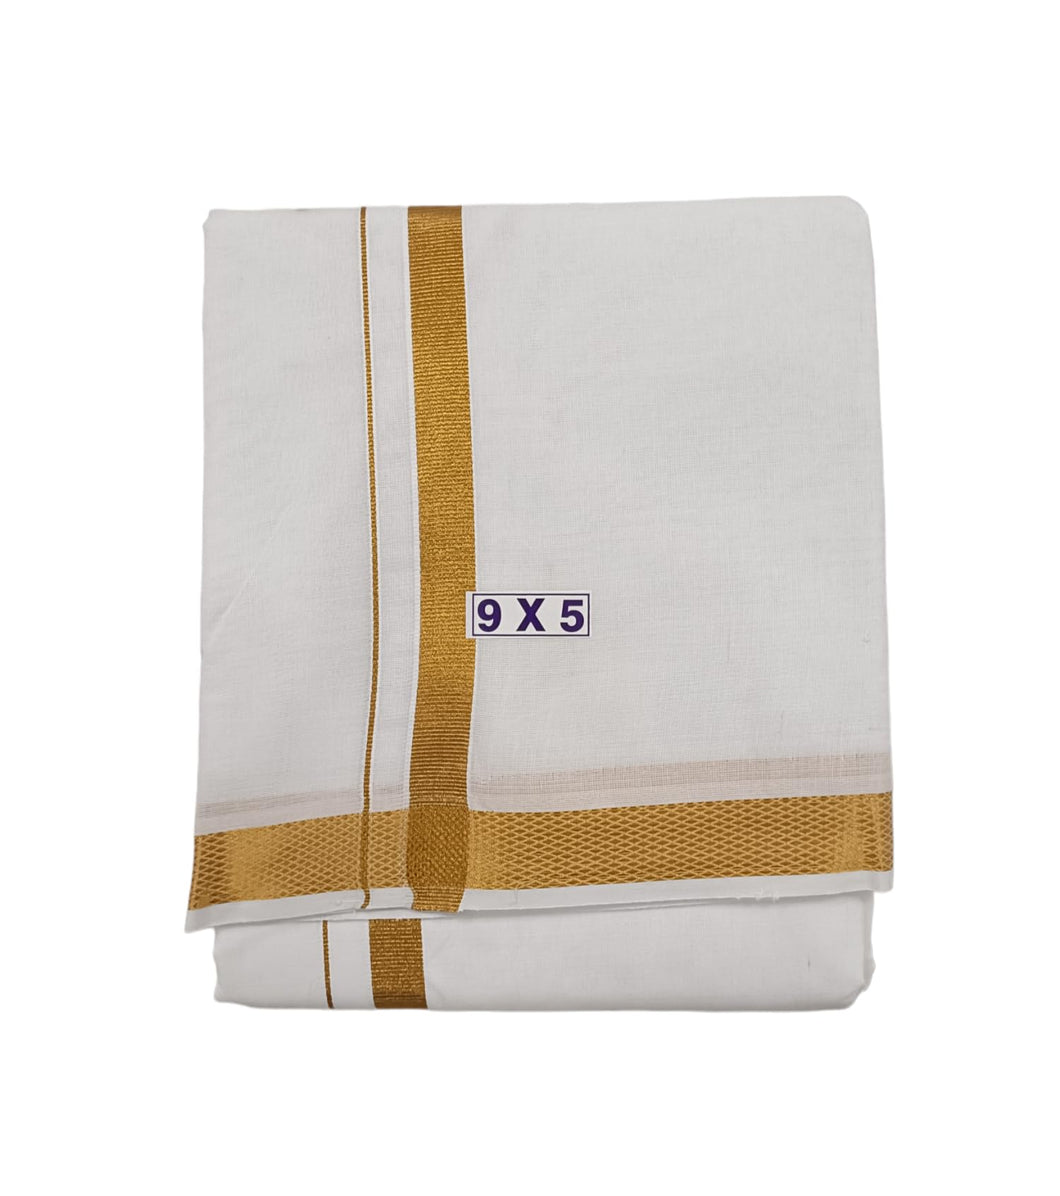 EXD777 Exclusive Dhoties Cotton dhoti with 1